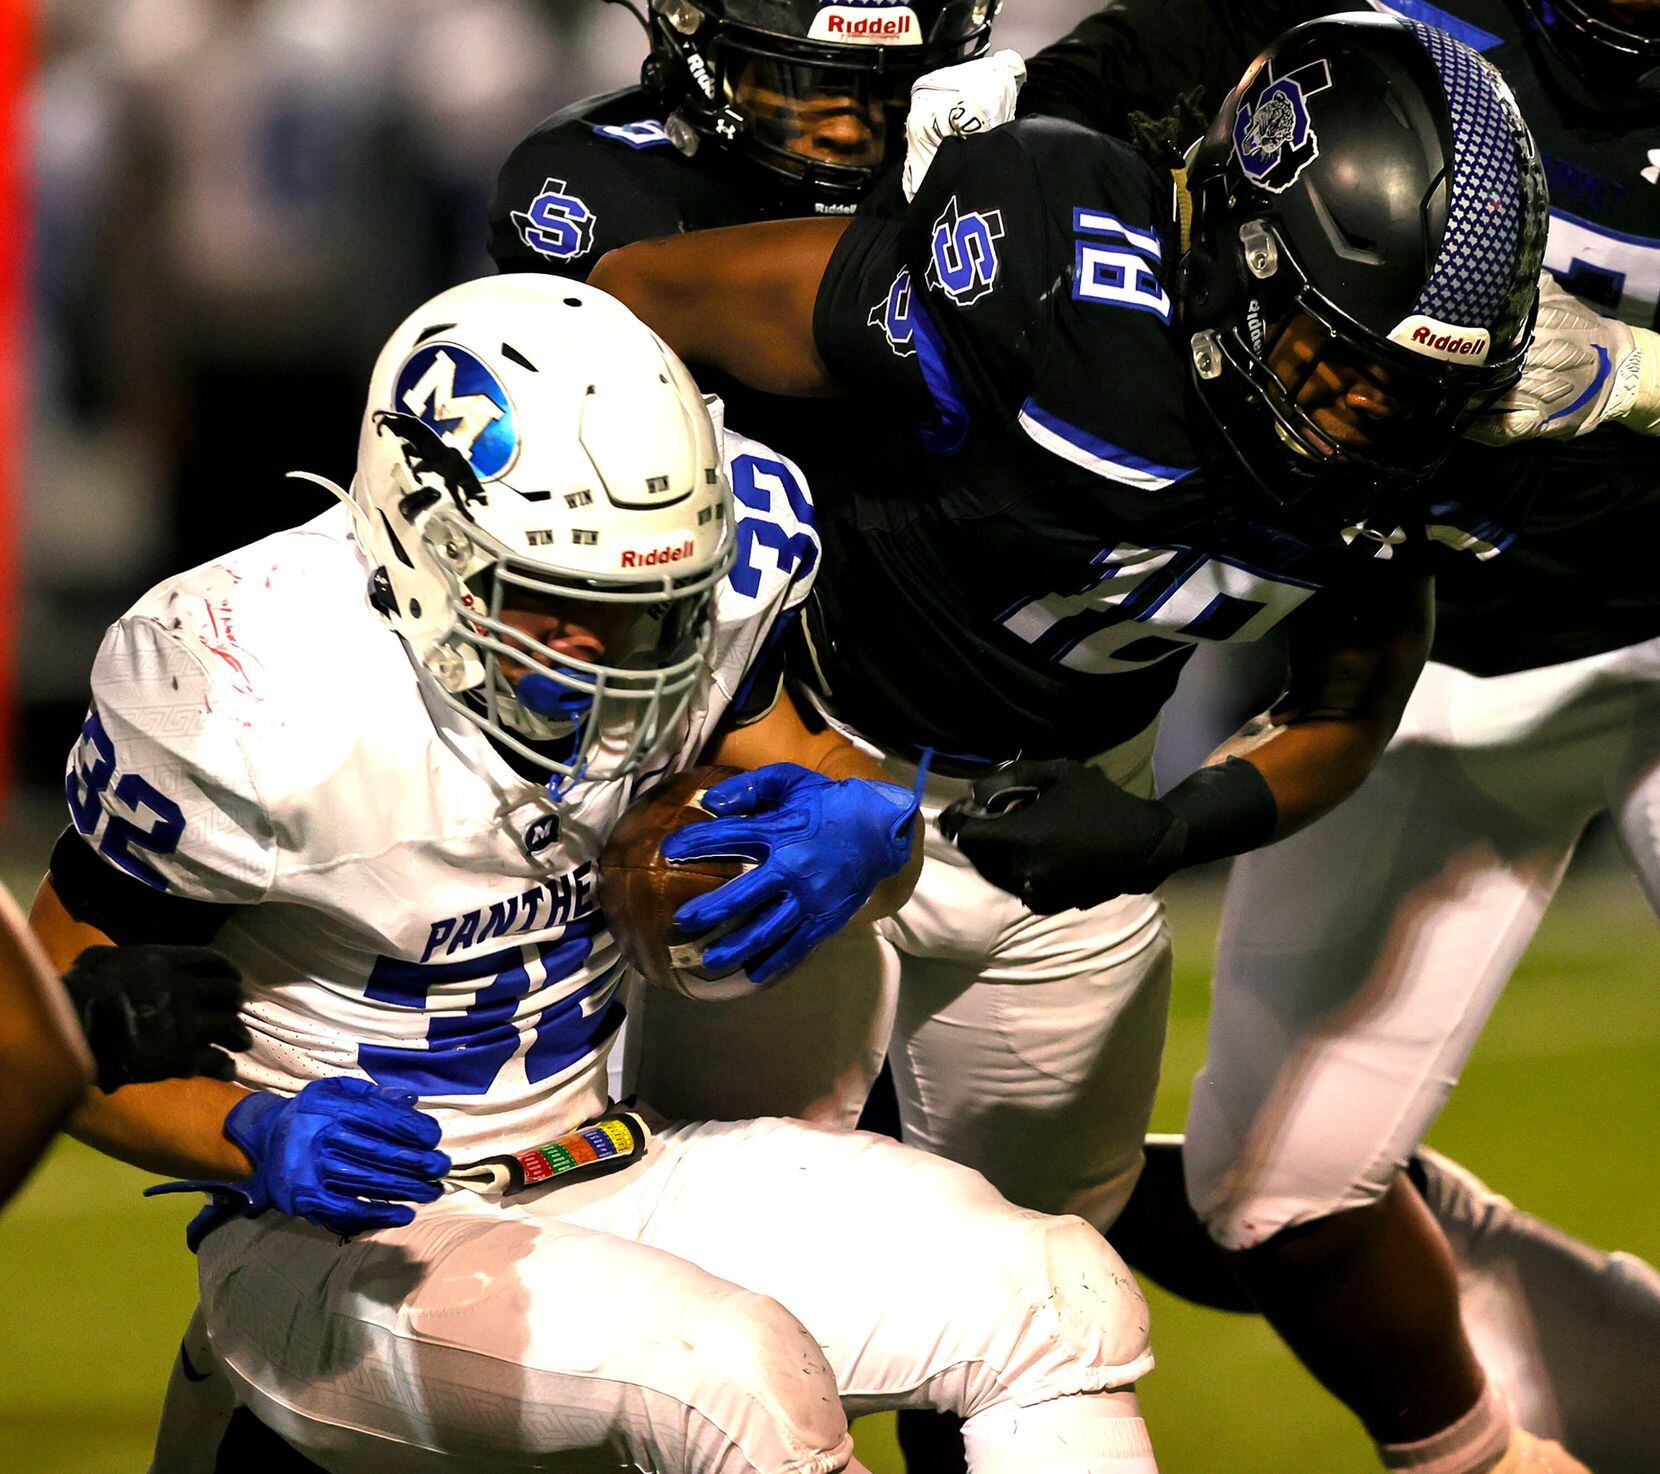 Midlothian running back Michael Garber (32) gets stuffed for no gain against Mansfield Summit linebacker Kyland Reed (18) during the first half of the 5A Division I Region I semifinal high school football playoff game played on November 26, 2021 at Gopher-Warrior Bowl in Grand Prairie.  (Steve Nurenberg/Special Contributor)